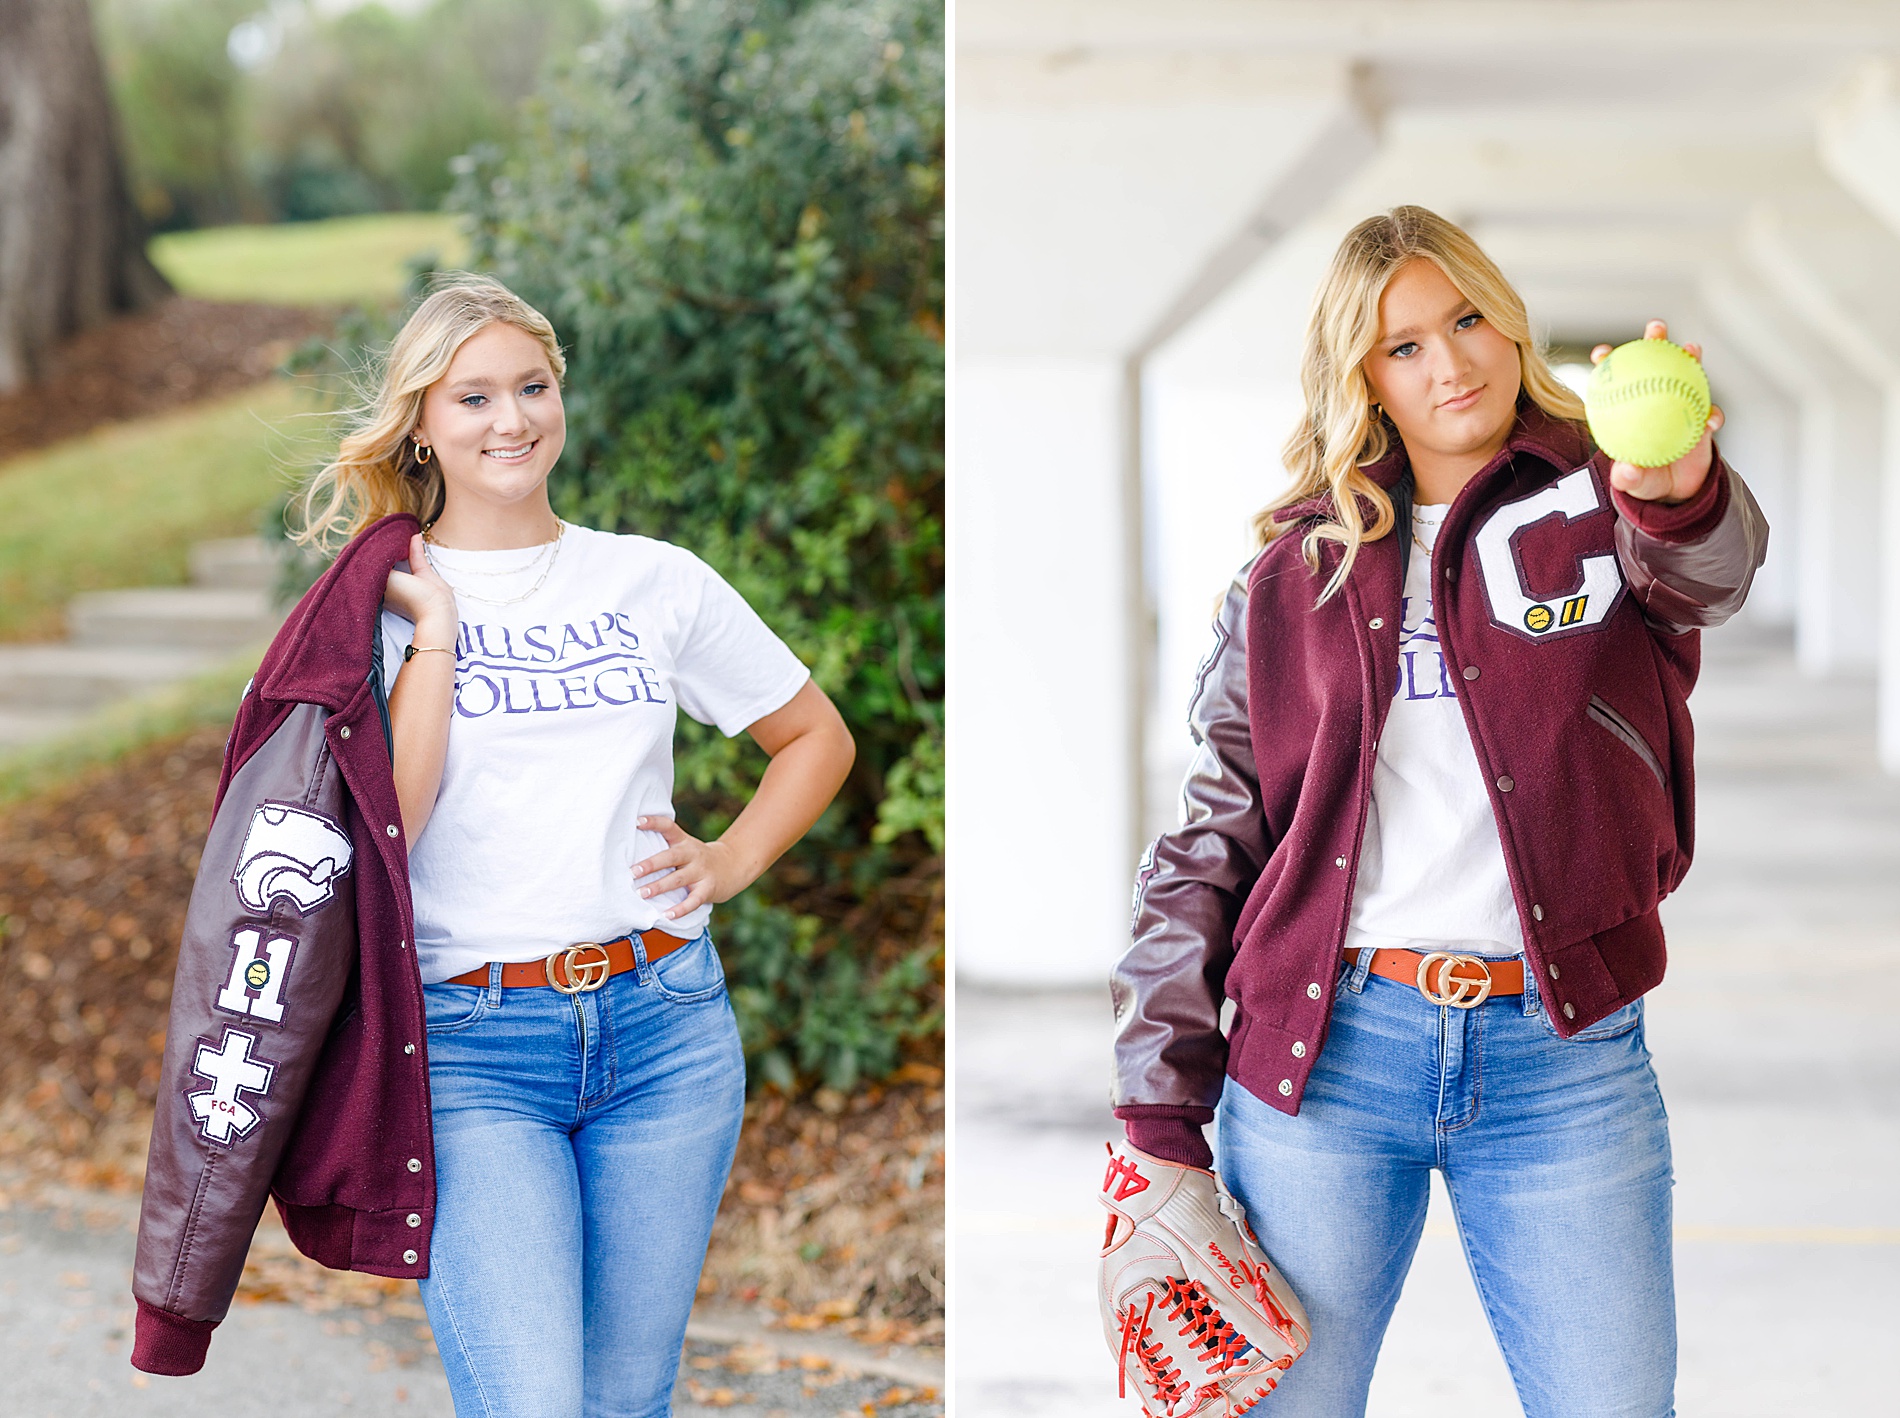 include senior ring or letterman Jacket to your senior session